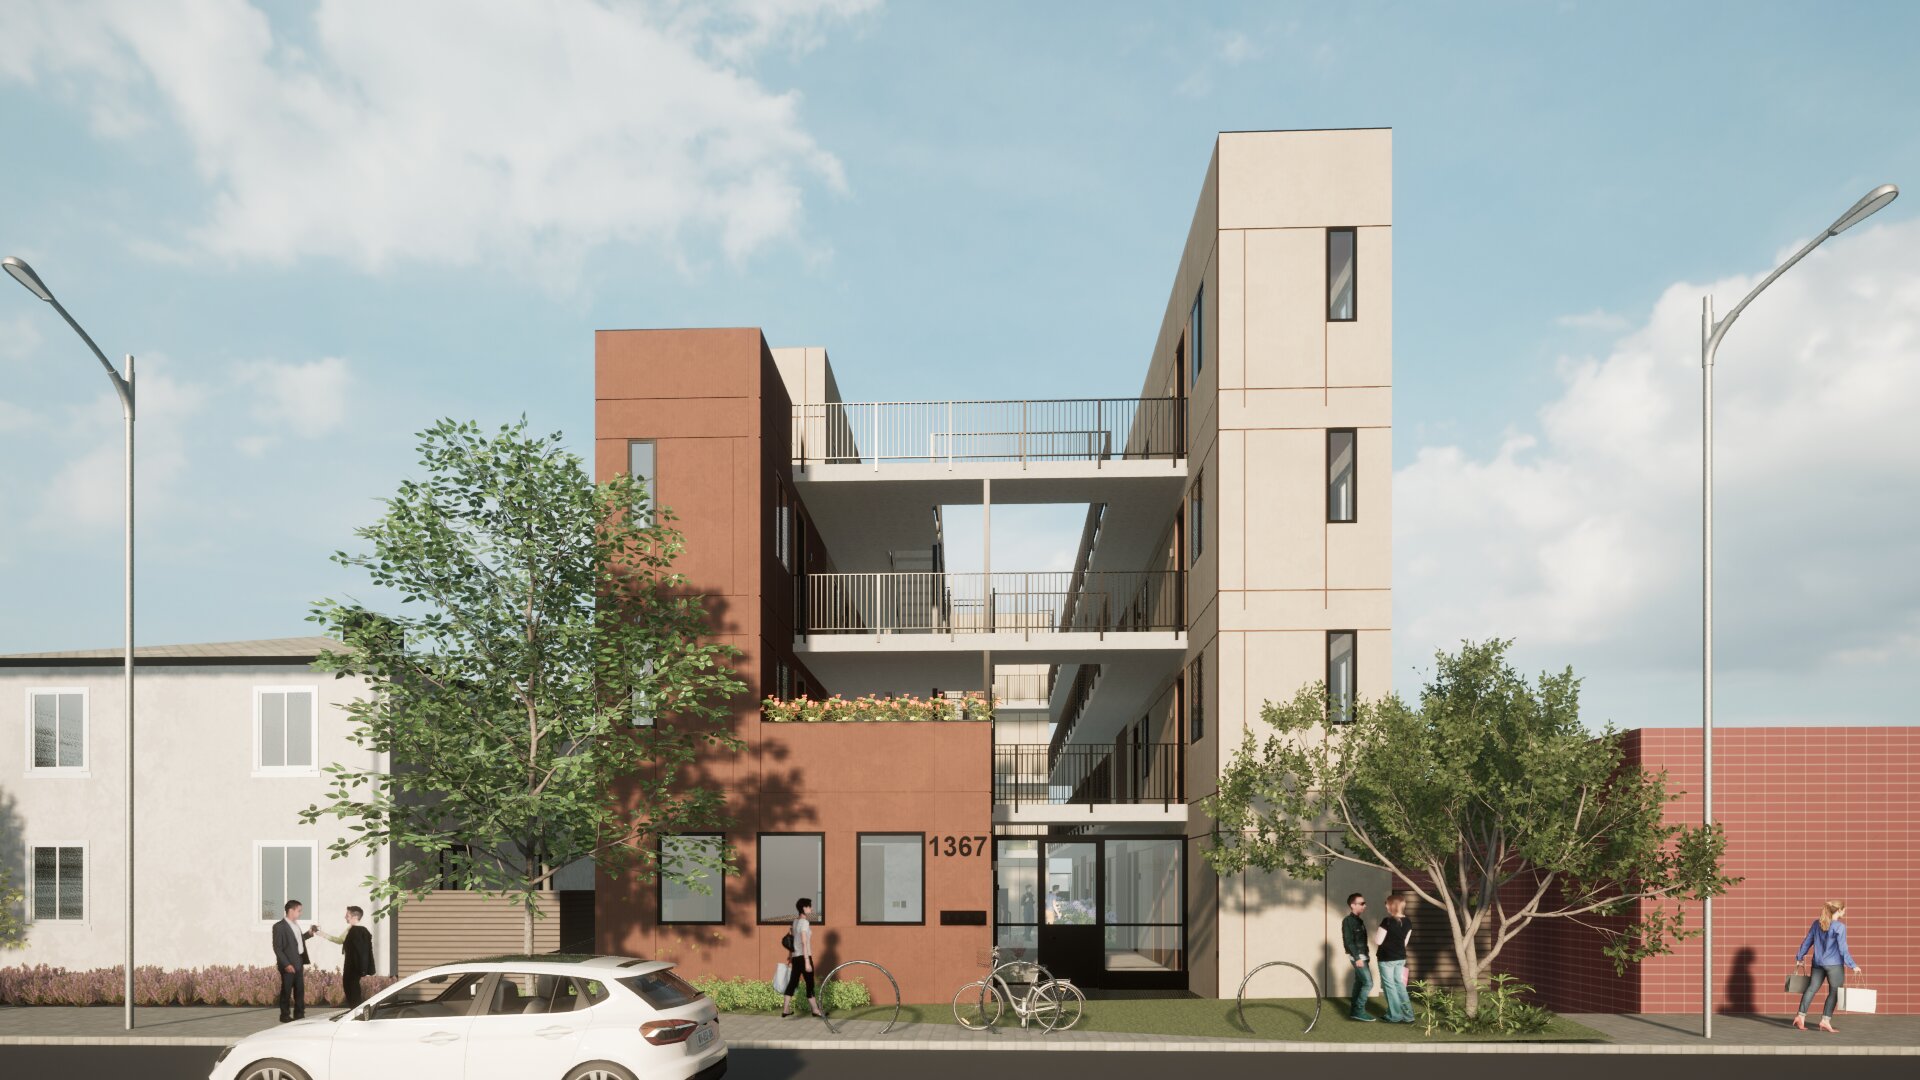 1367 University Avenue, rendering by Design Draw Build